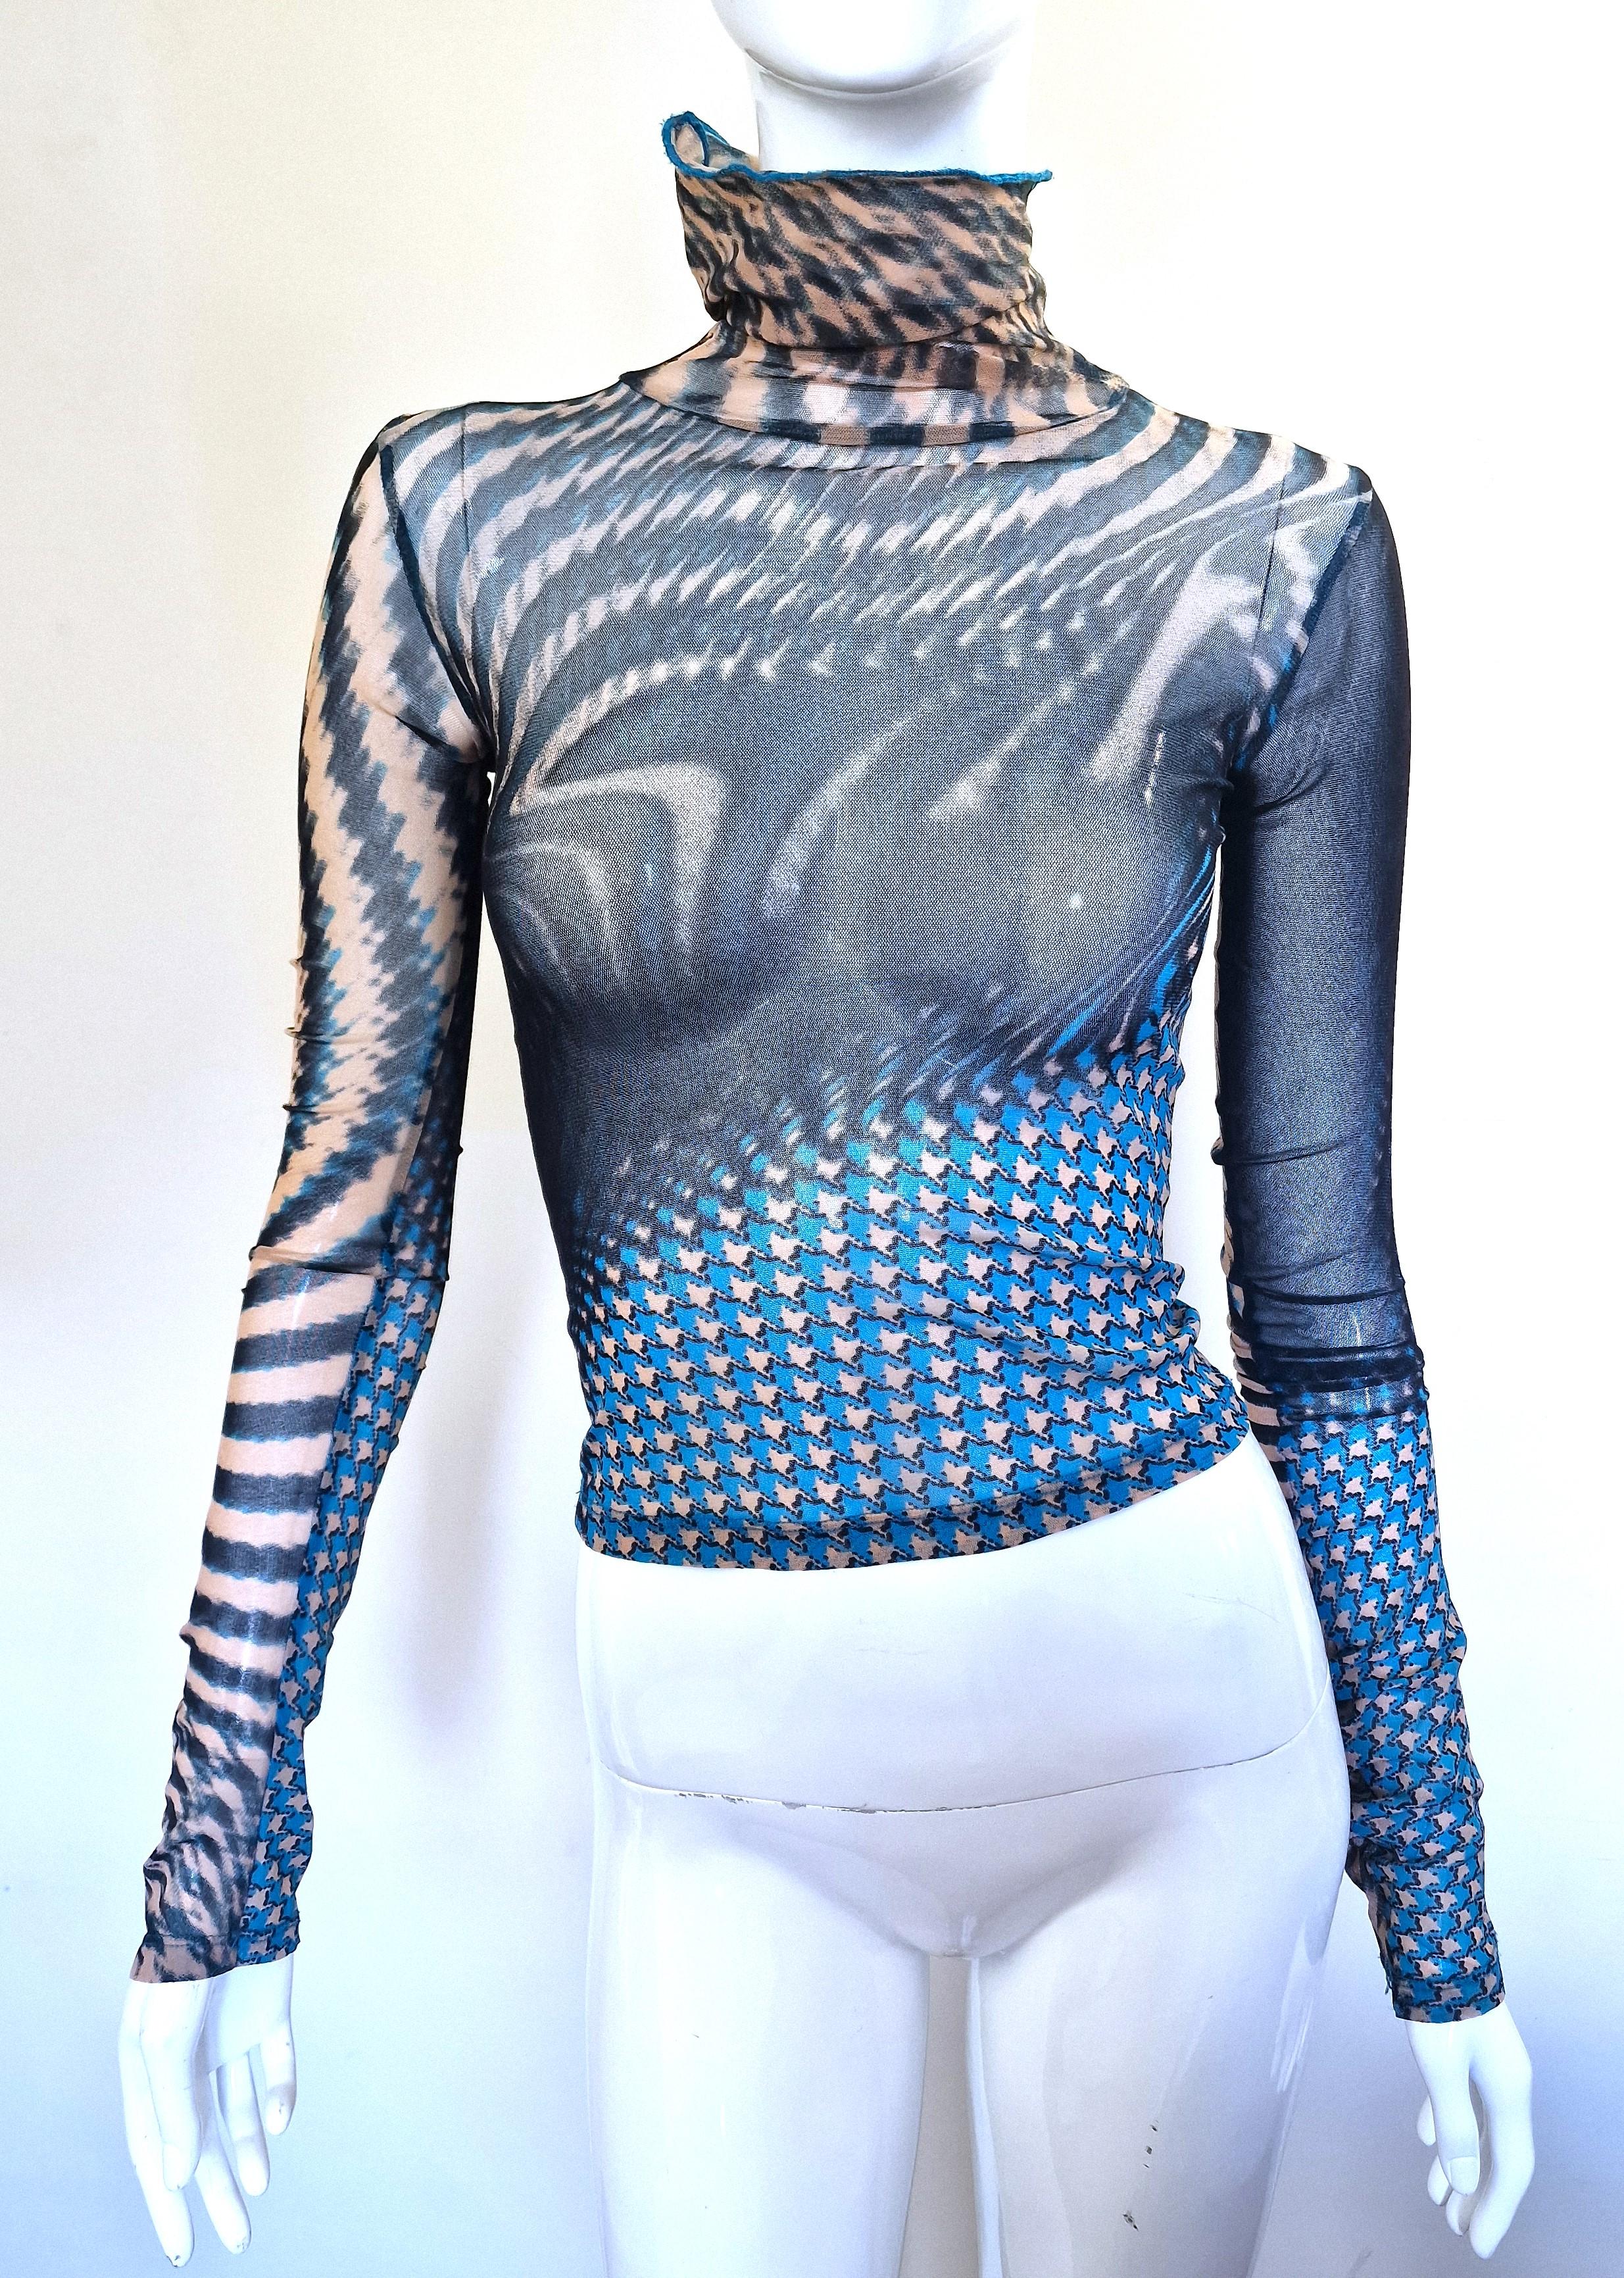 Roberto Cavalli Psychedelic Optical Illusion Sheer Mesh Transparent T-shirt Top In Excellent Condition For Sale In PARIS, FR